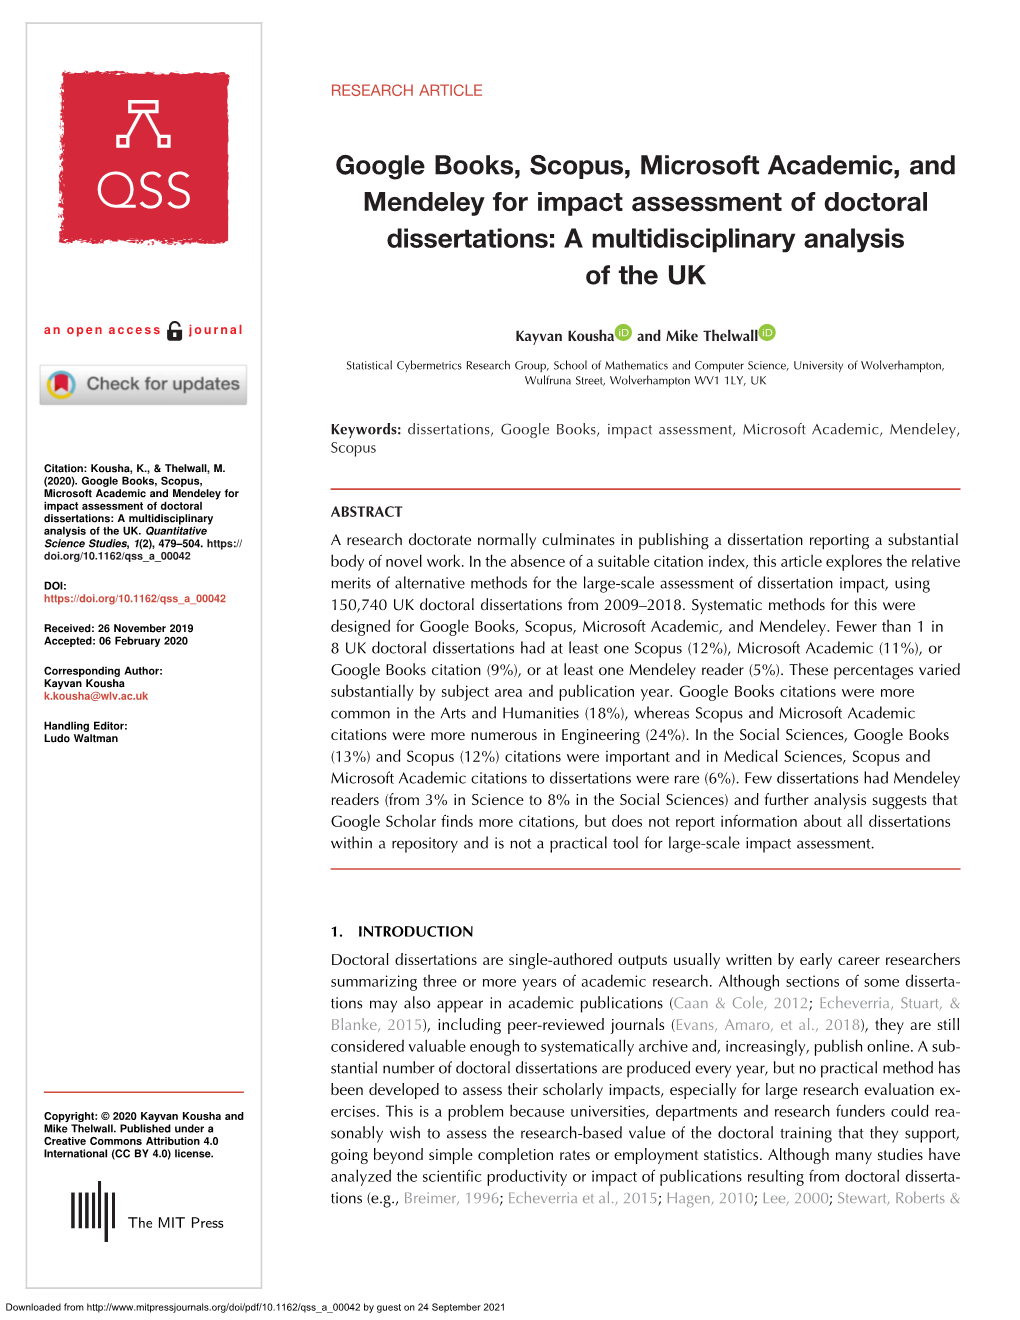 Google Books, Scopus, Microsoft Academic, and Mendeley for Impact Assessment of Doctoral Dissertations: a Multidisciplinary Analysis of the UK